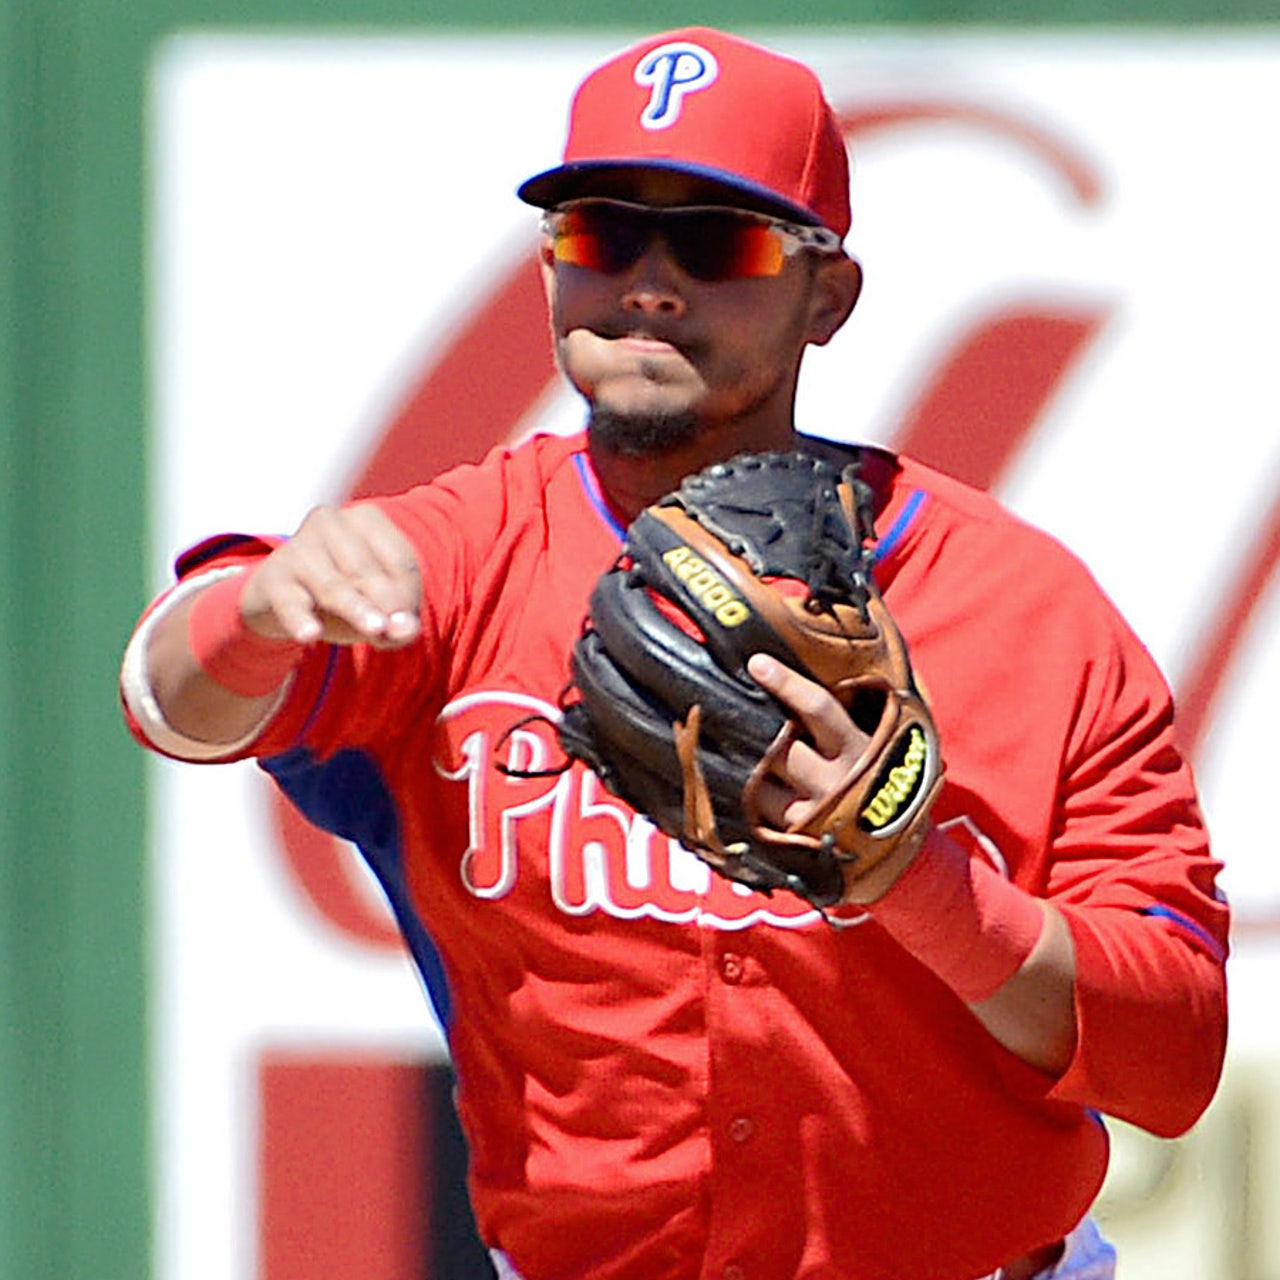 Phillies infielder Freddy Galvis diagnosed with infection caused by MRSA